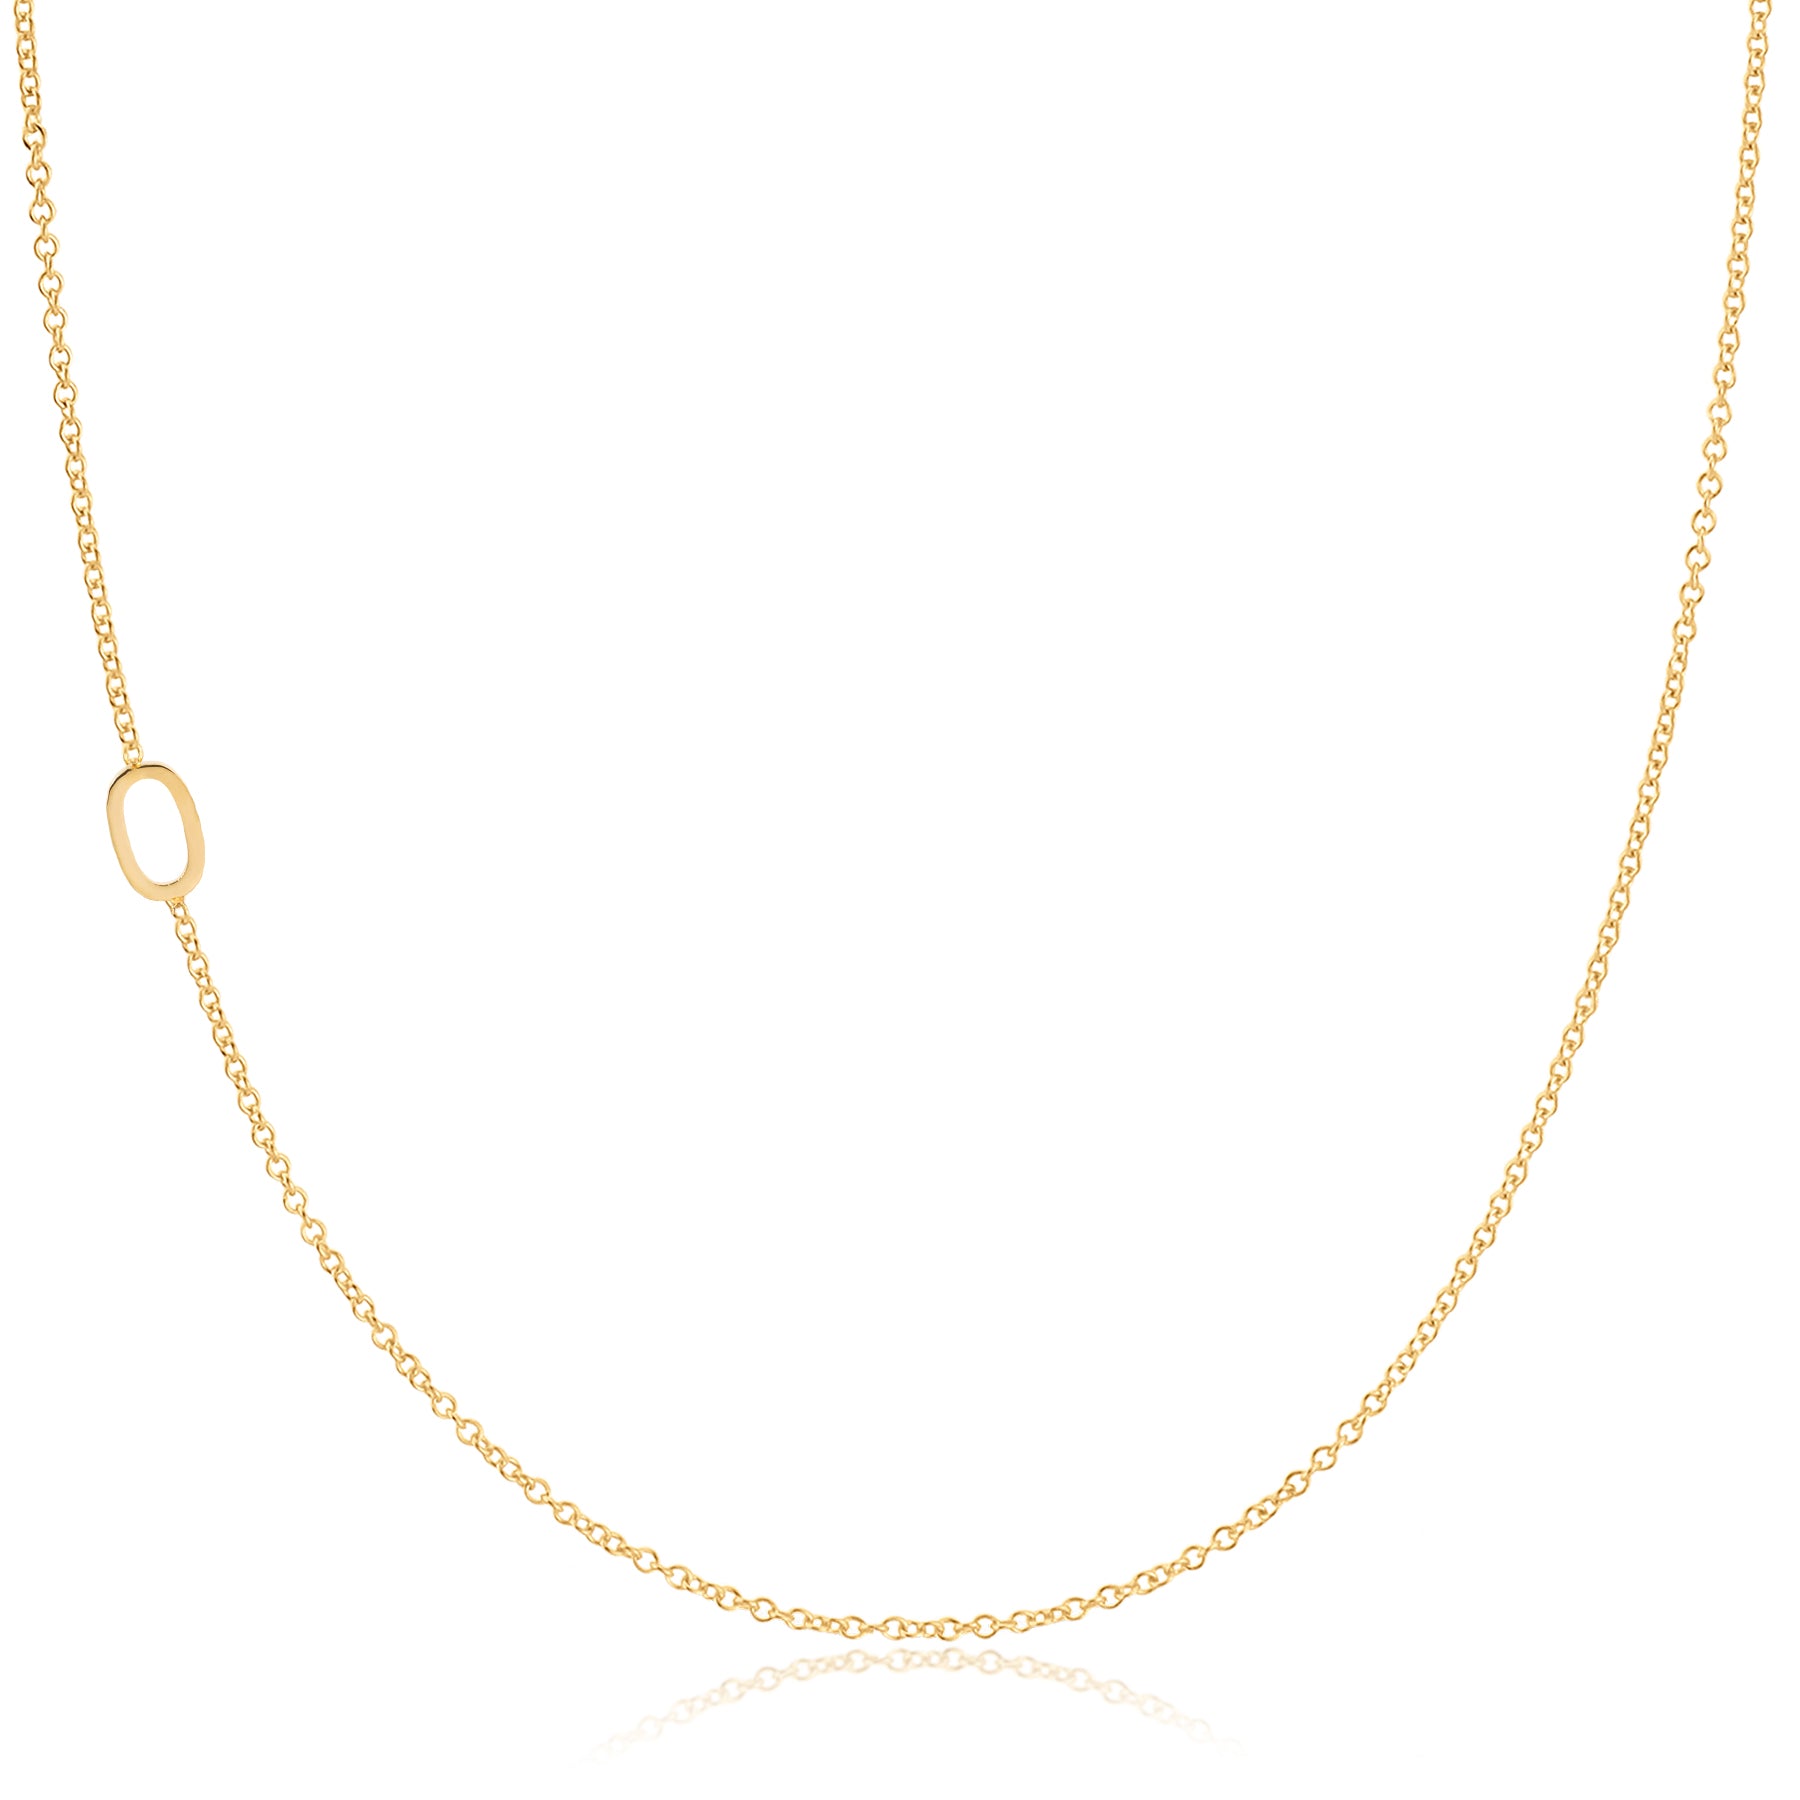 14K GOLD ASYMMETRICAL NUMBER NECKLACE - 0